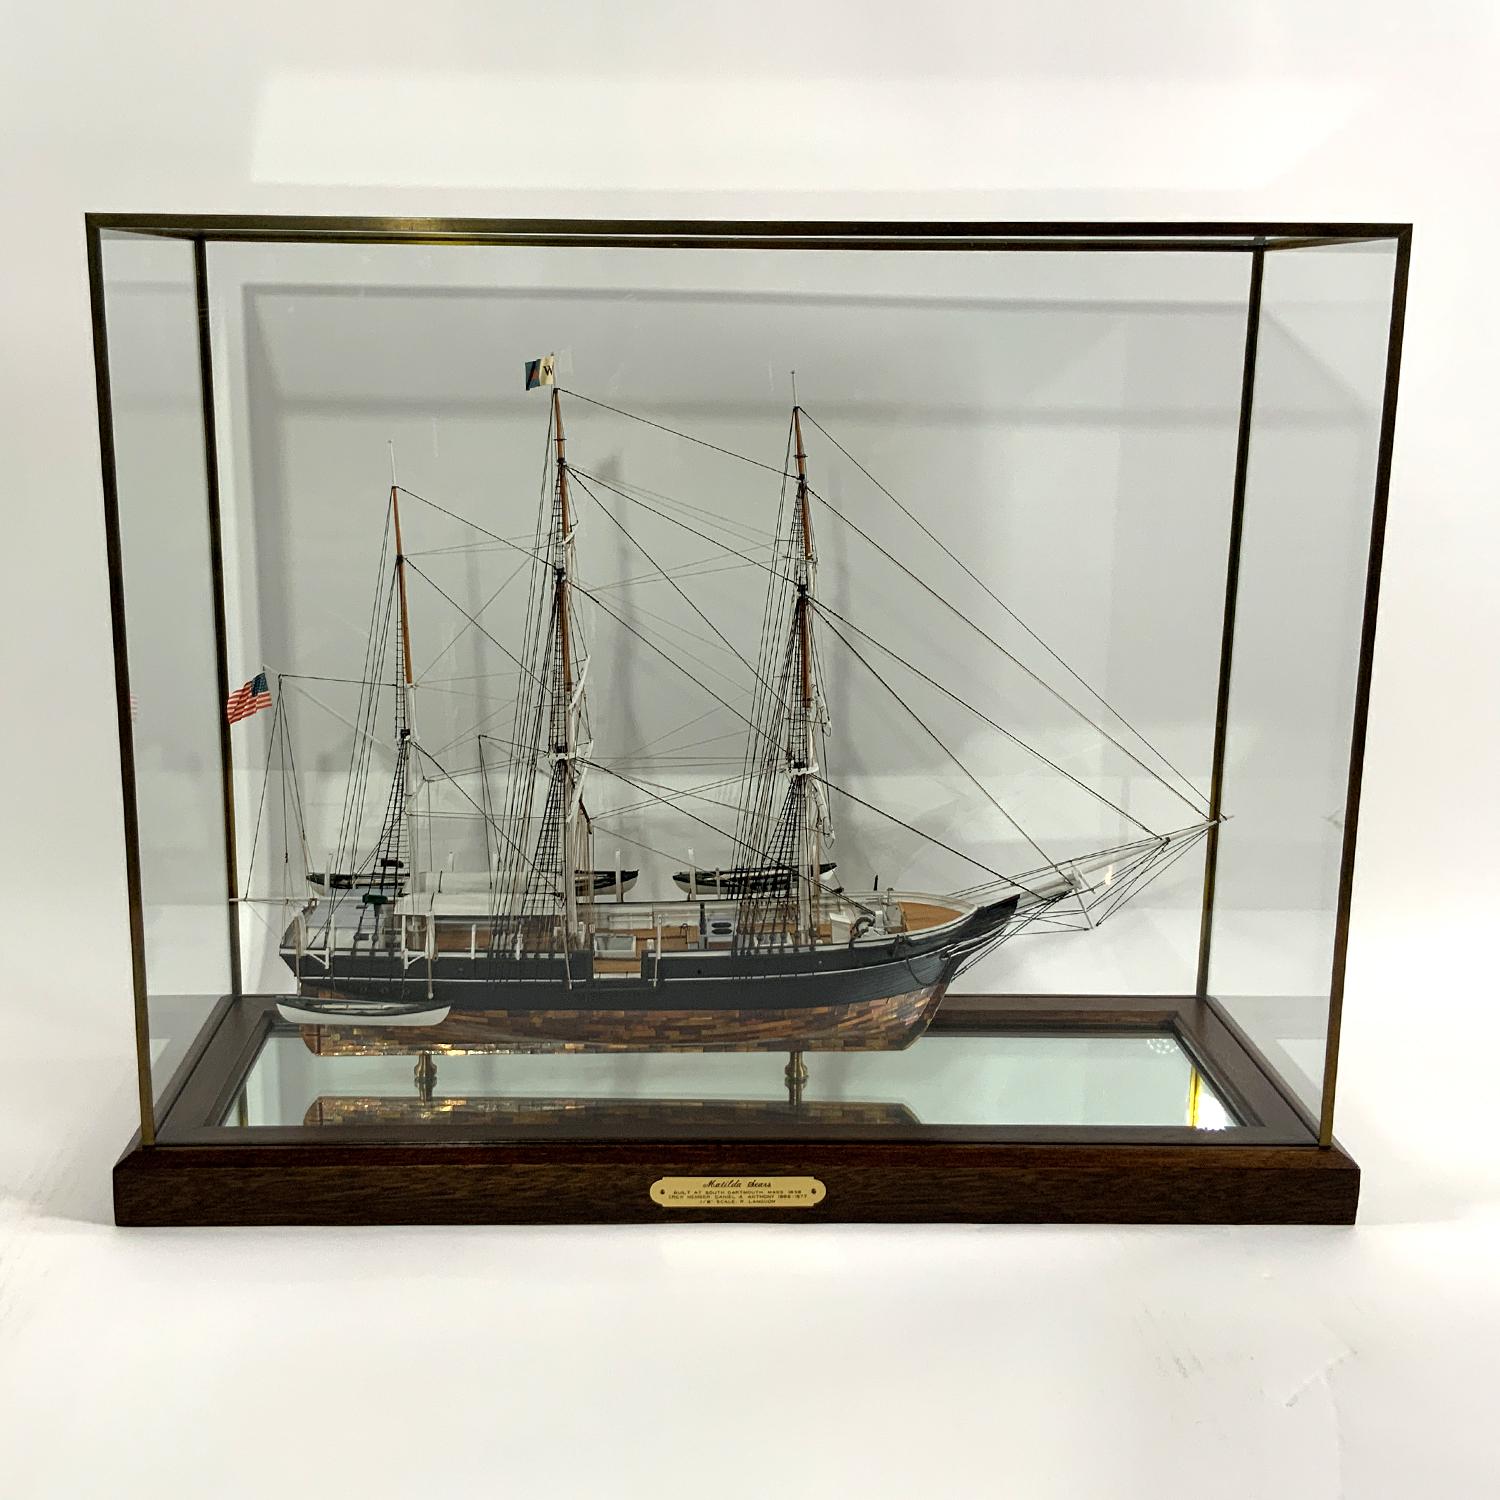 Whaleship model of the Matilda Sears. Built at Dartmouth, Massachusetts, launched in 1886. Very fine model with exposed ribs and planks on portside, painted and copper sheathed on starboard. The vessel carries six scale whaleboats, four completely